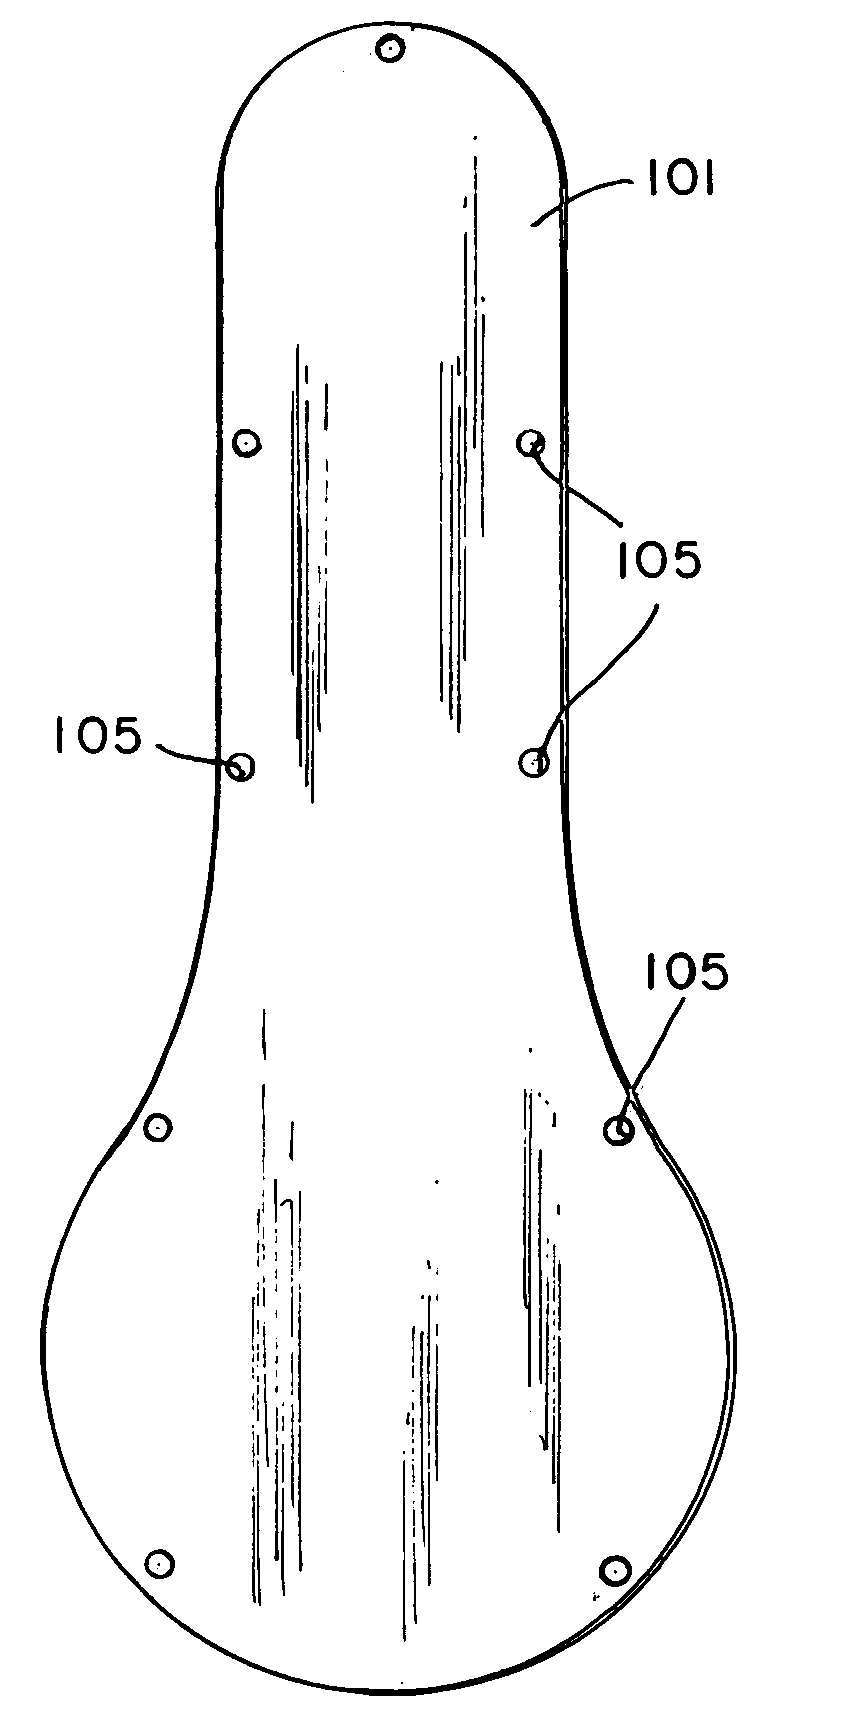 Process for fabricating of a speaker enclosure having any preselected external, shape containing internal cavities shaped with preselected enhancements for each preselected driver mounted within said external shaped enclosure